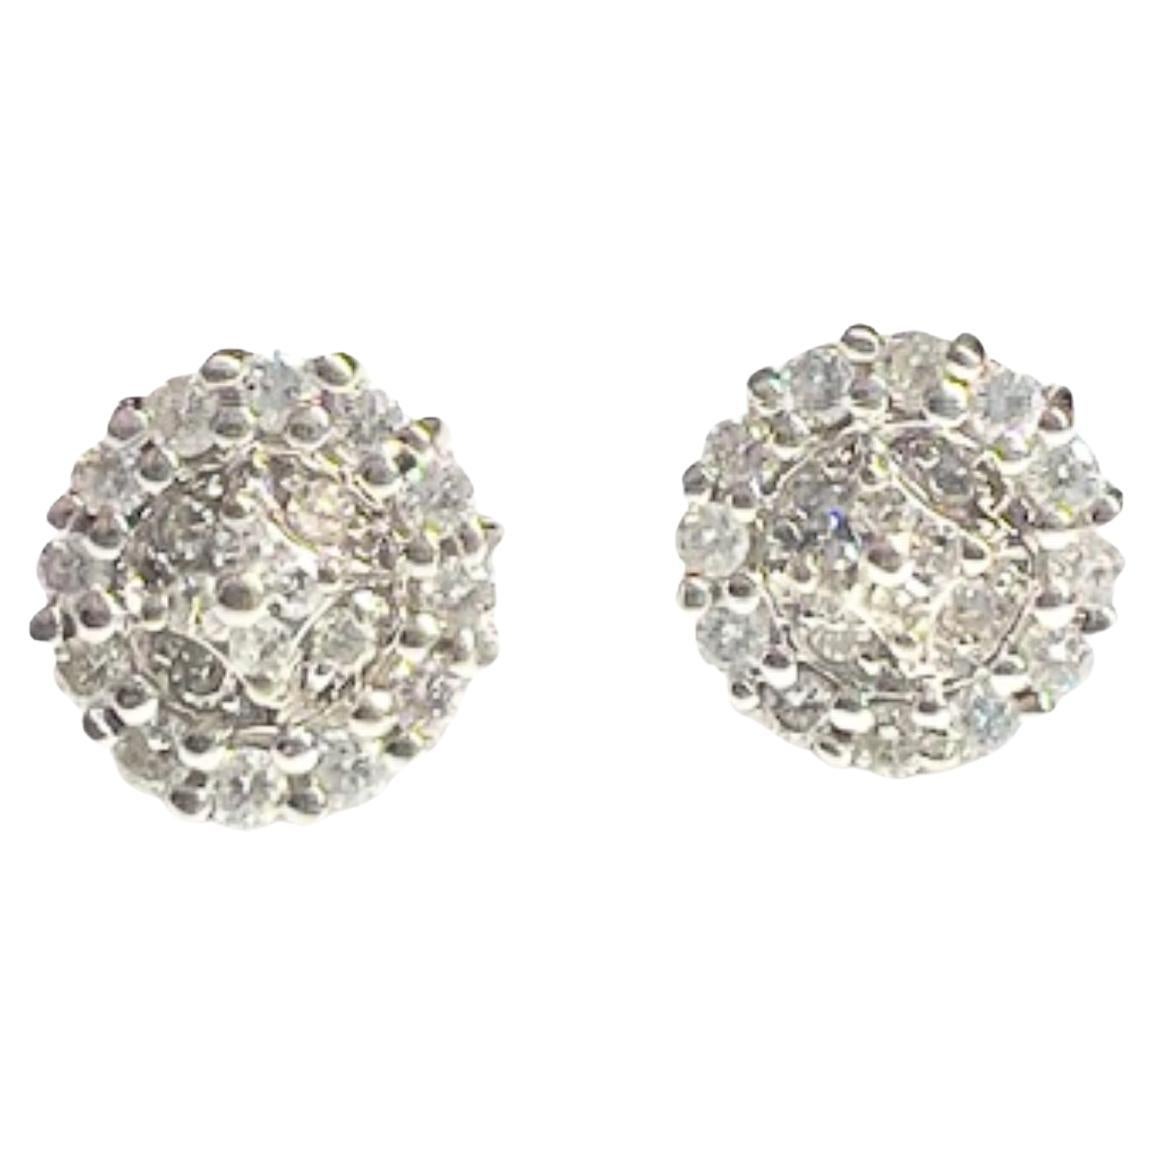 Contemporary 2.40 ct Diamonds White Gold Earrings